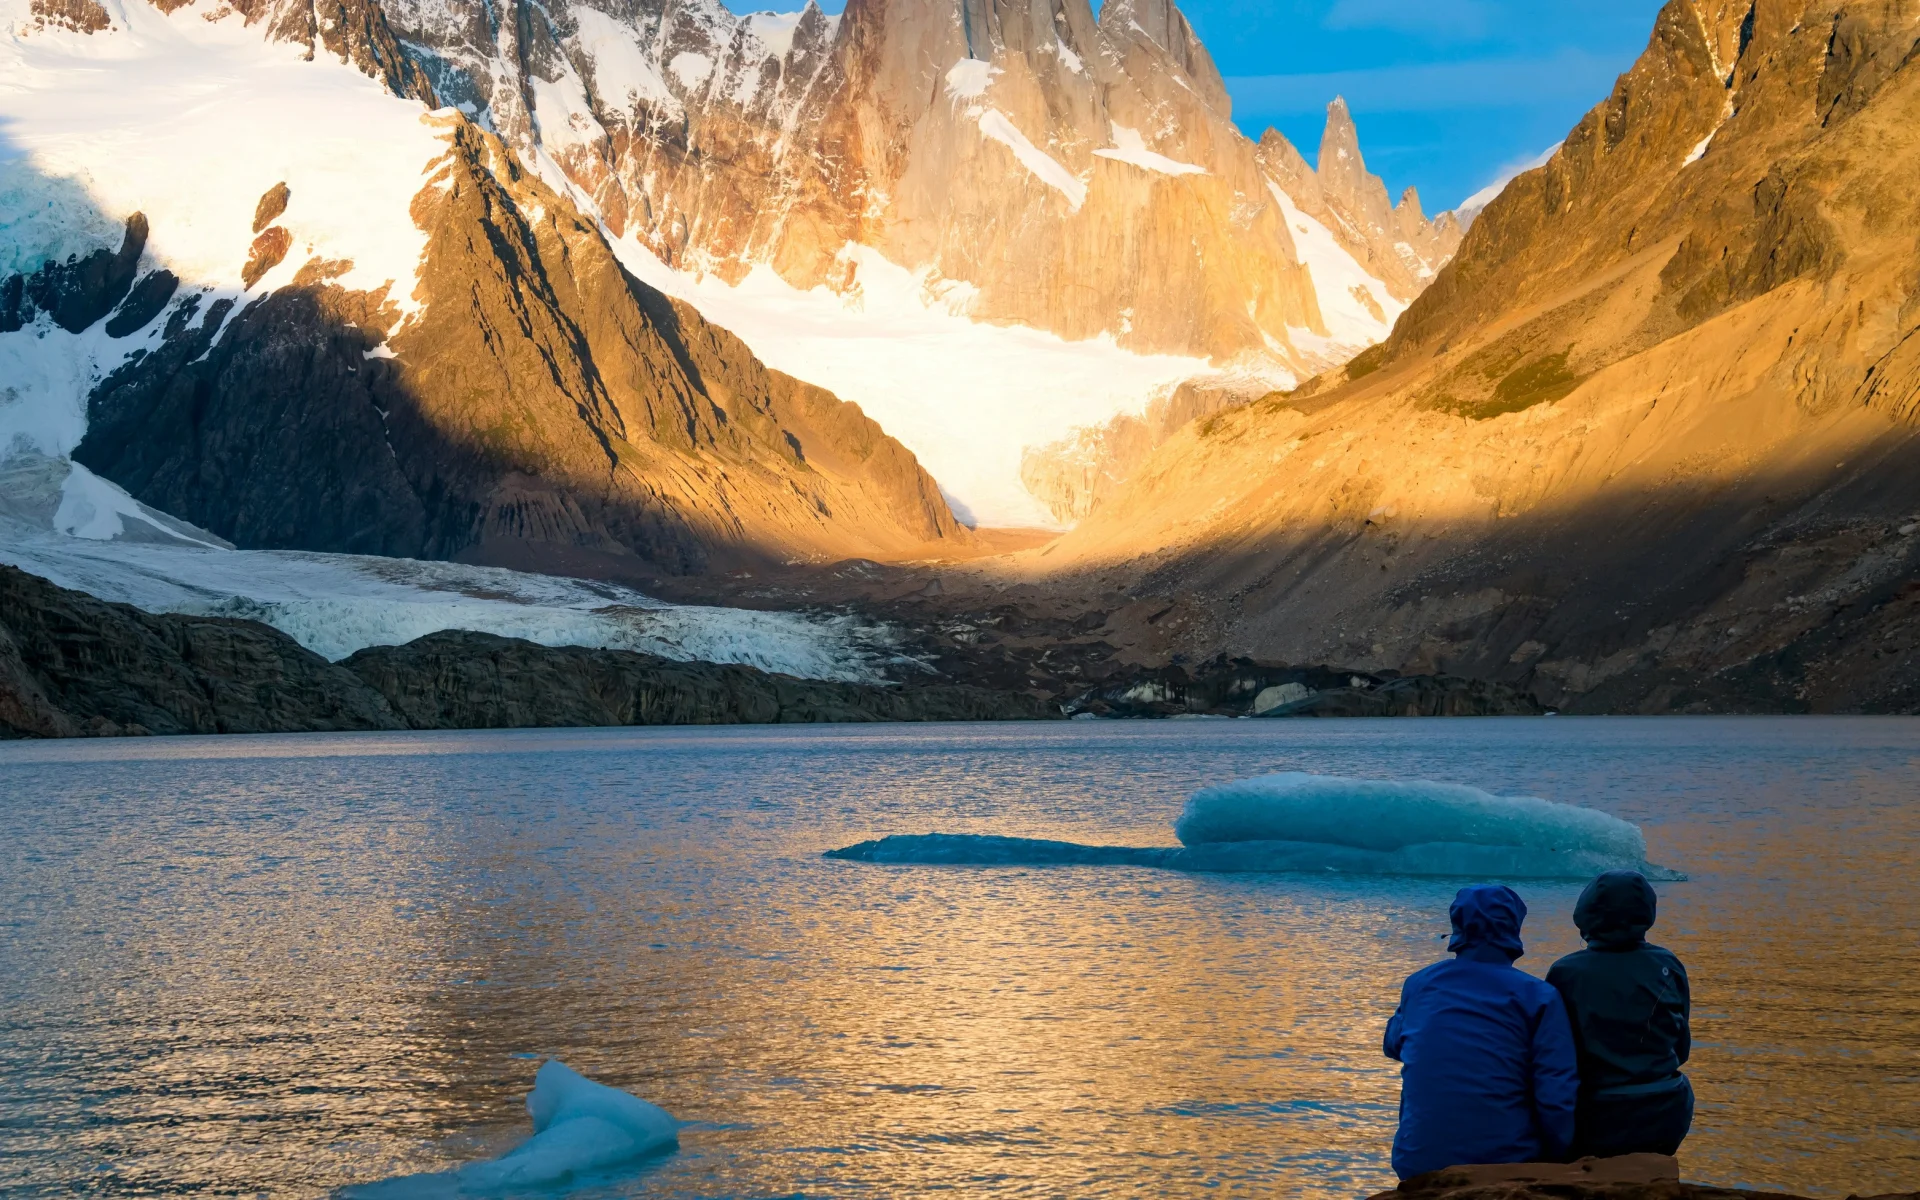 Two people sit on a rock looking out to the massive snow-capped hills of Glaciares National Park.